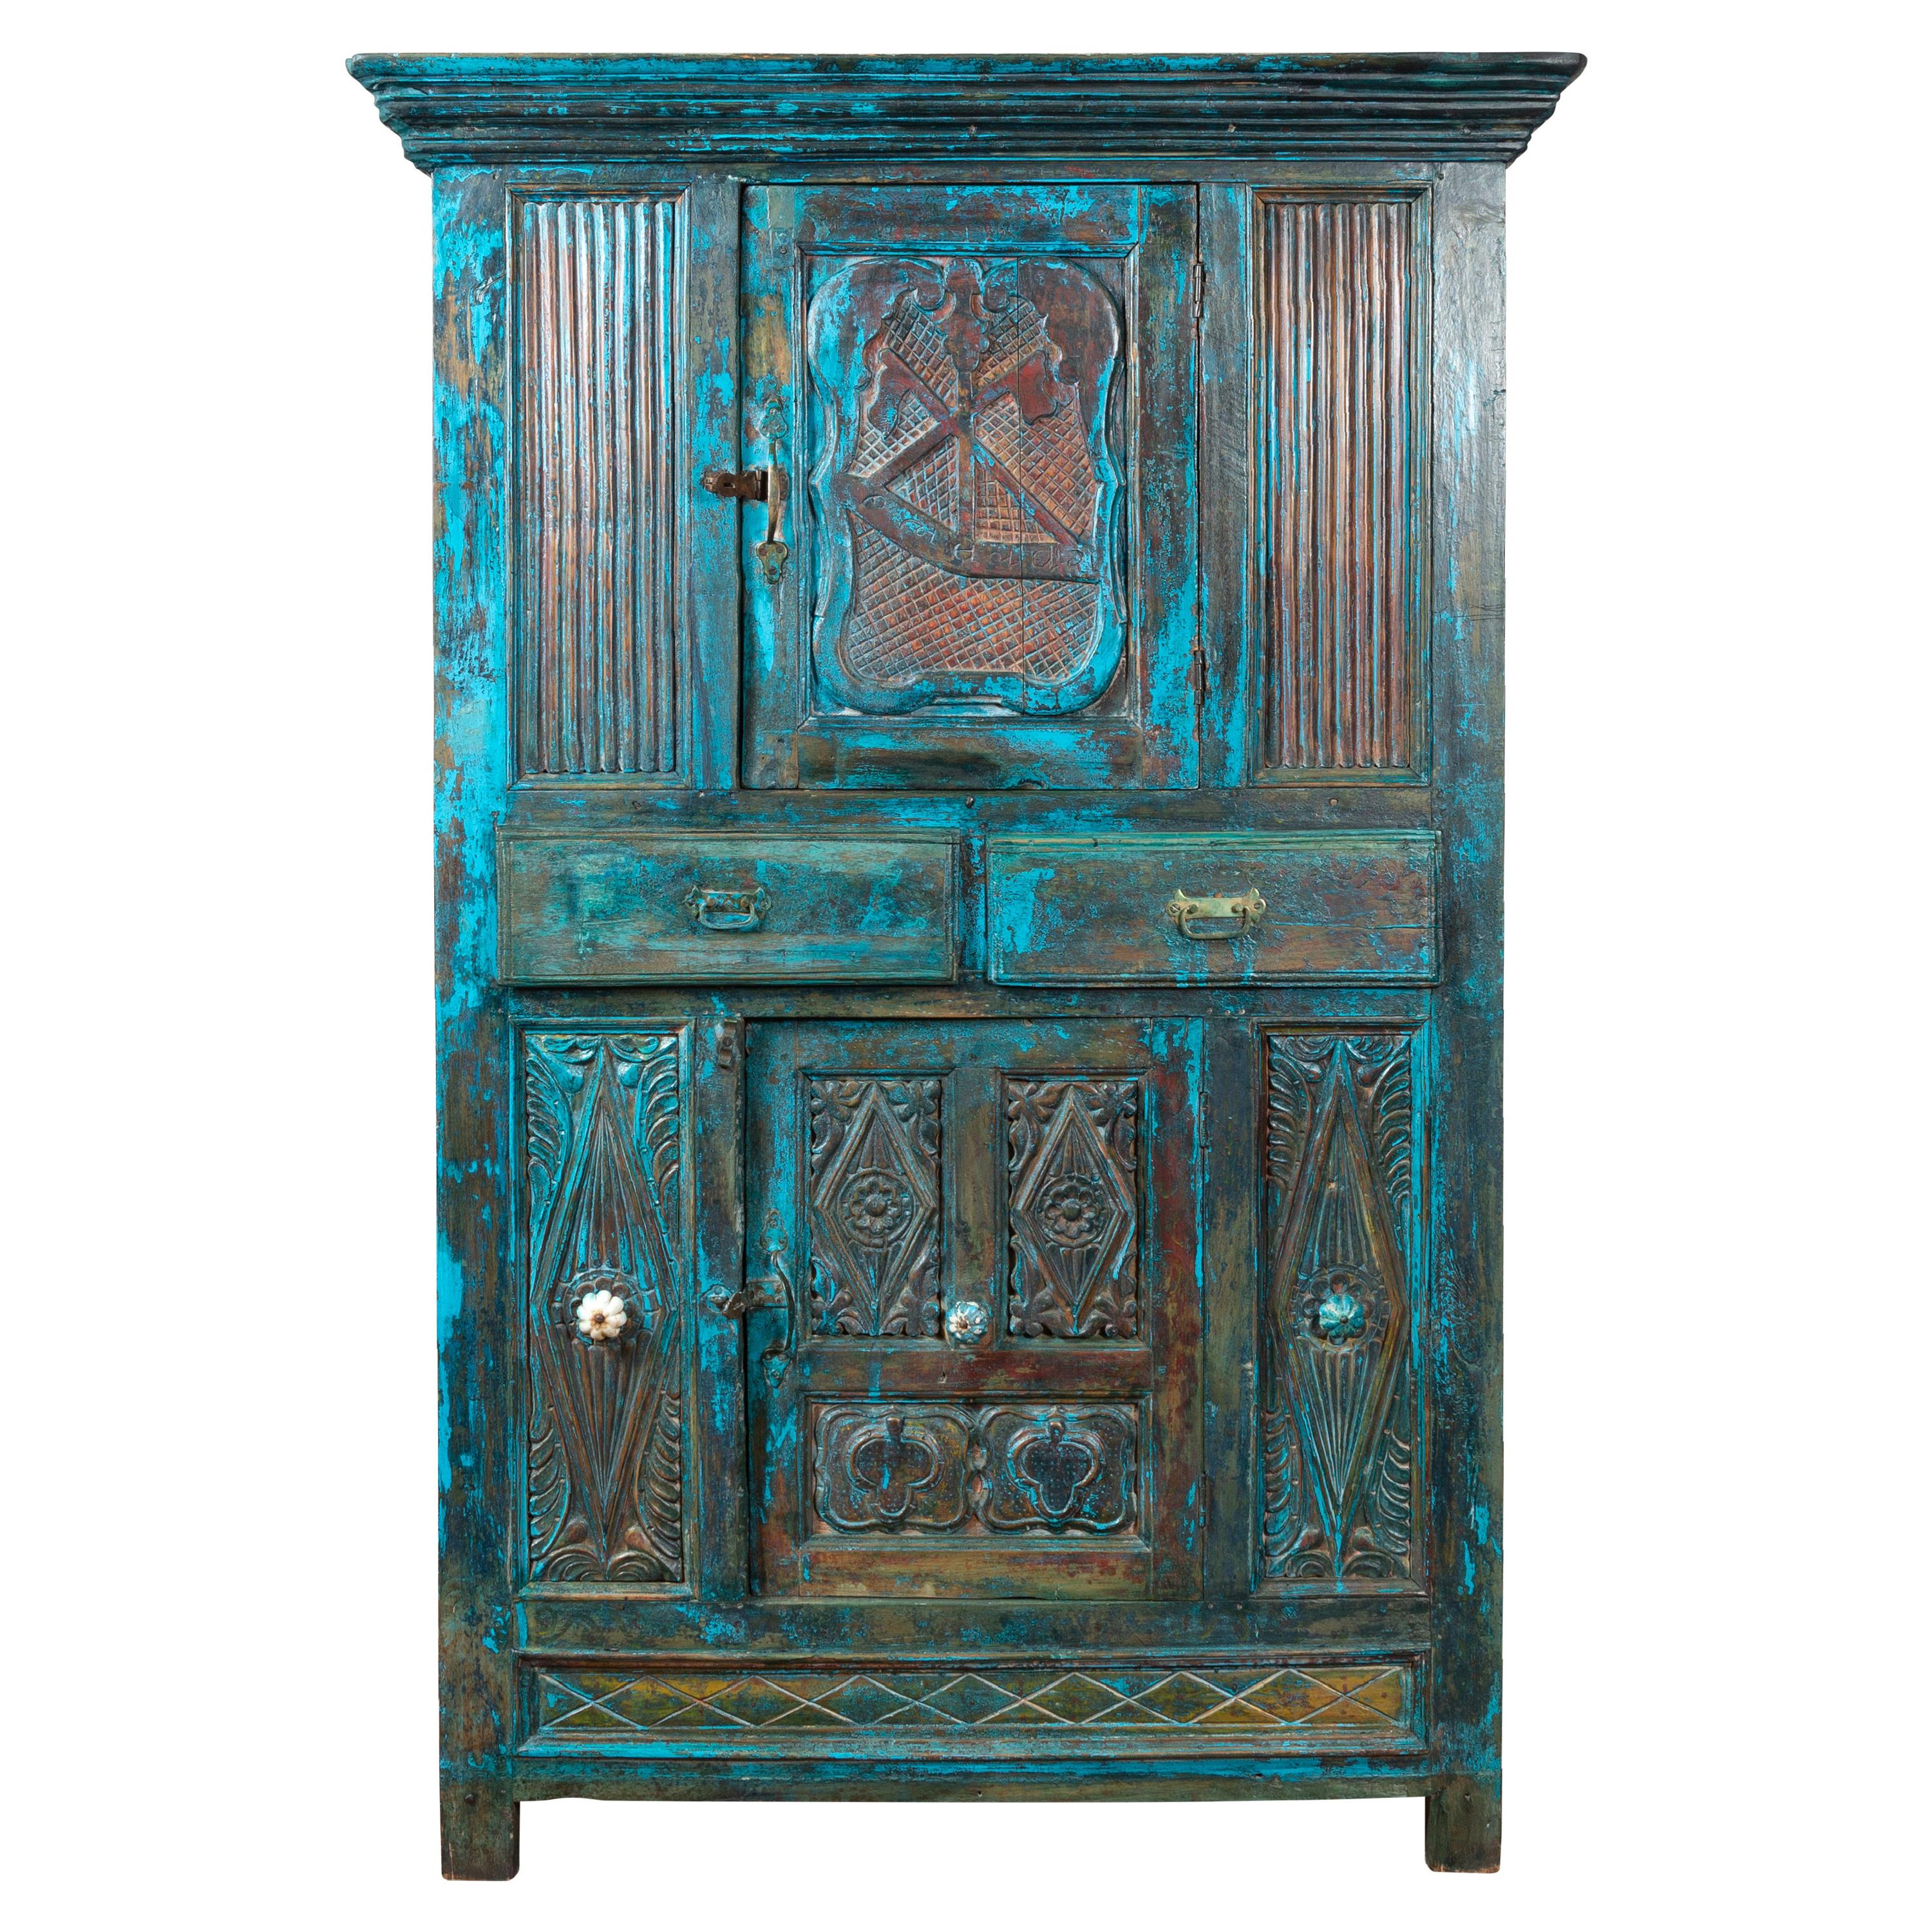 Indian 19th Century Royal Teal Painted Cabinet with Carved Doors and Two Drawers For Sale